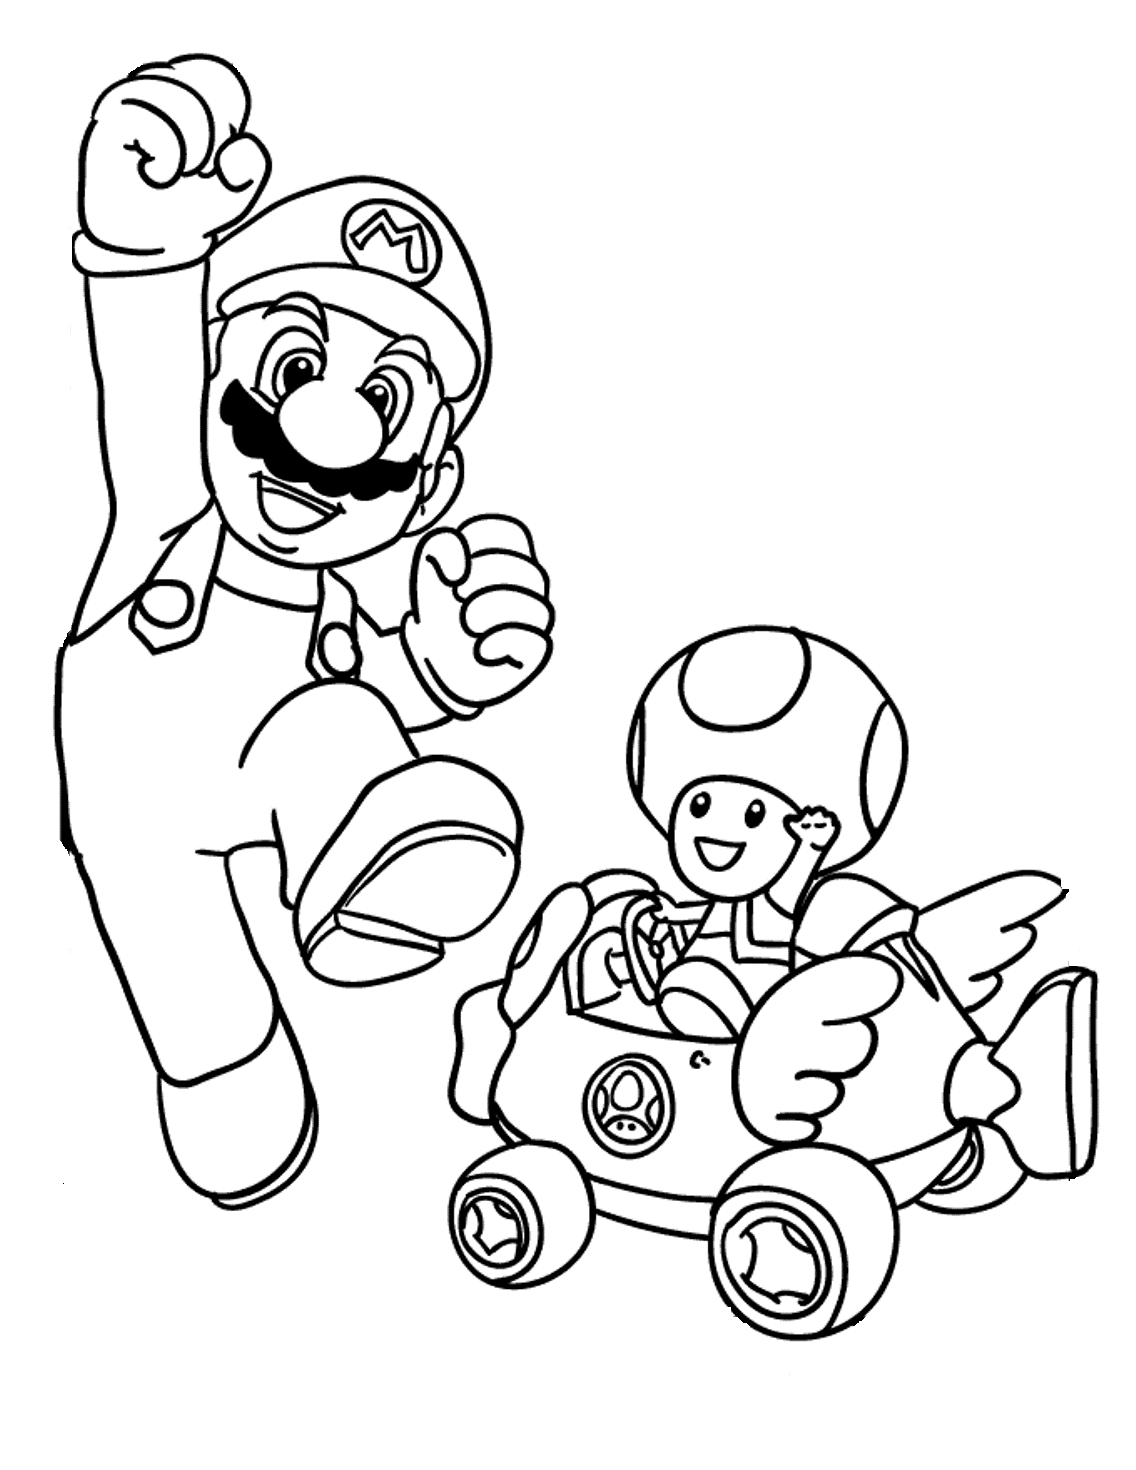 402 Cute Mario Coloring Pages for Kids